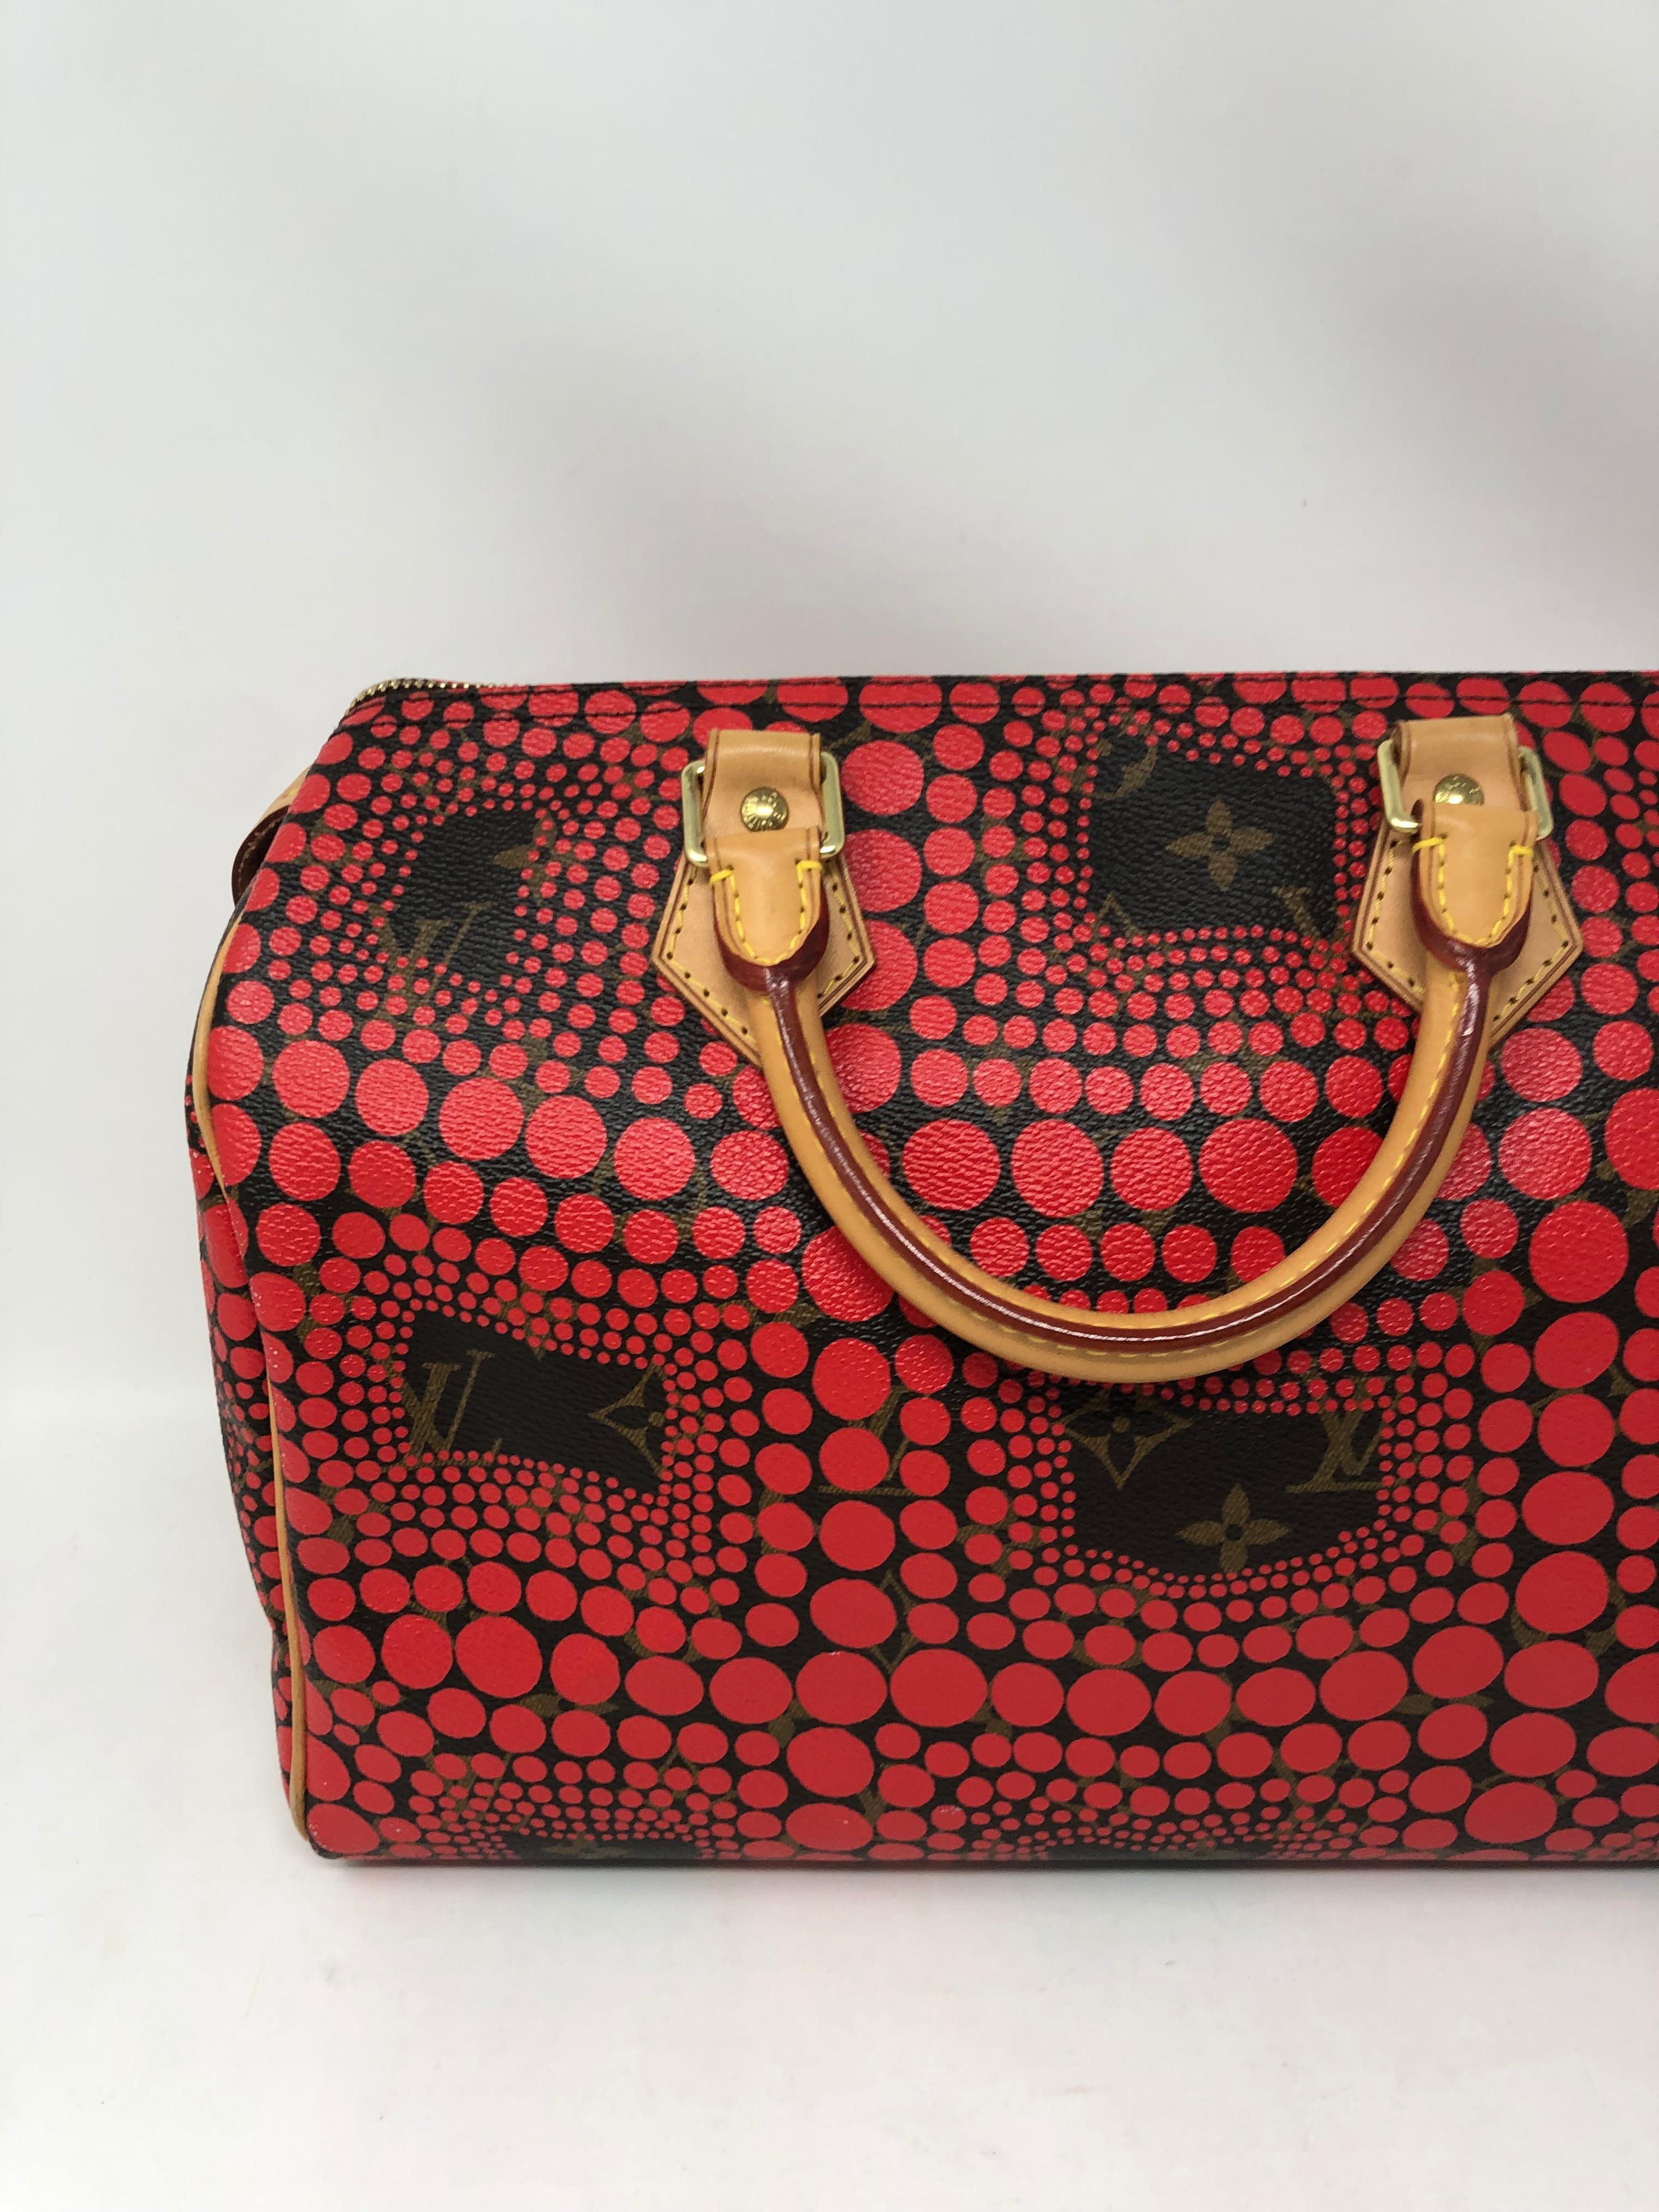 Louis Vuitton Red Dots Speedy 30 by Yayoi Kusama. Great condition. Clean interior. Medium size 30 speedy. Beautiful design by Kusama. Highly collectible. Rare and iconic. Guaranteed authentic. 